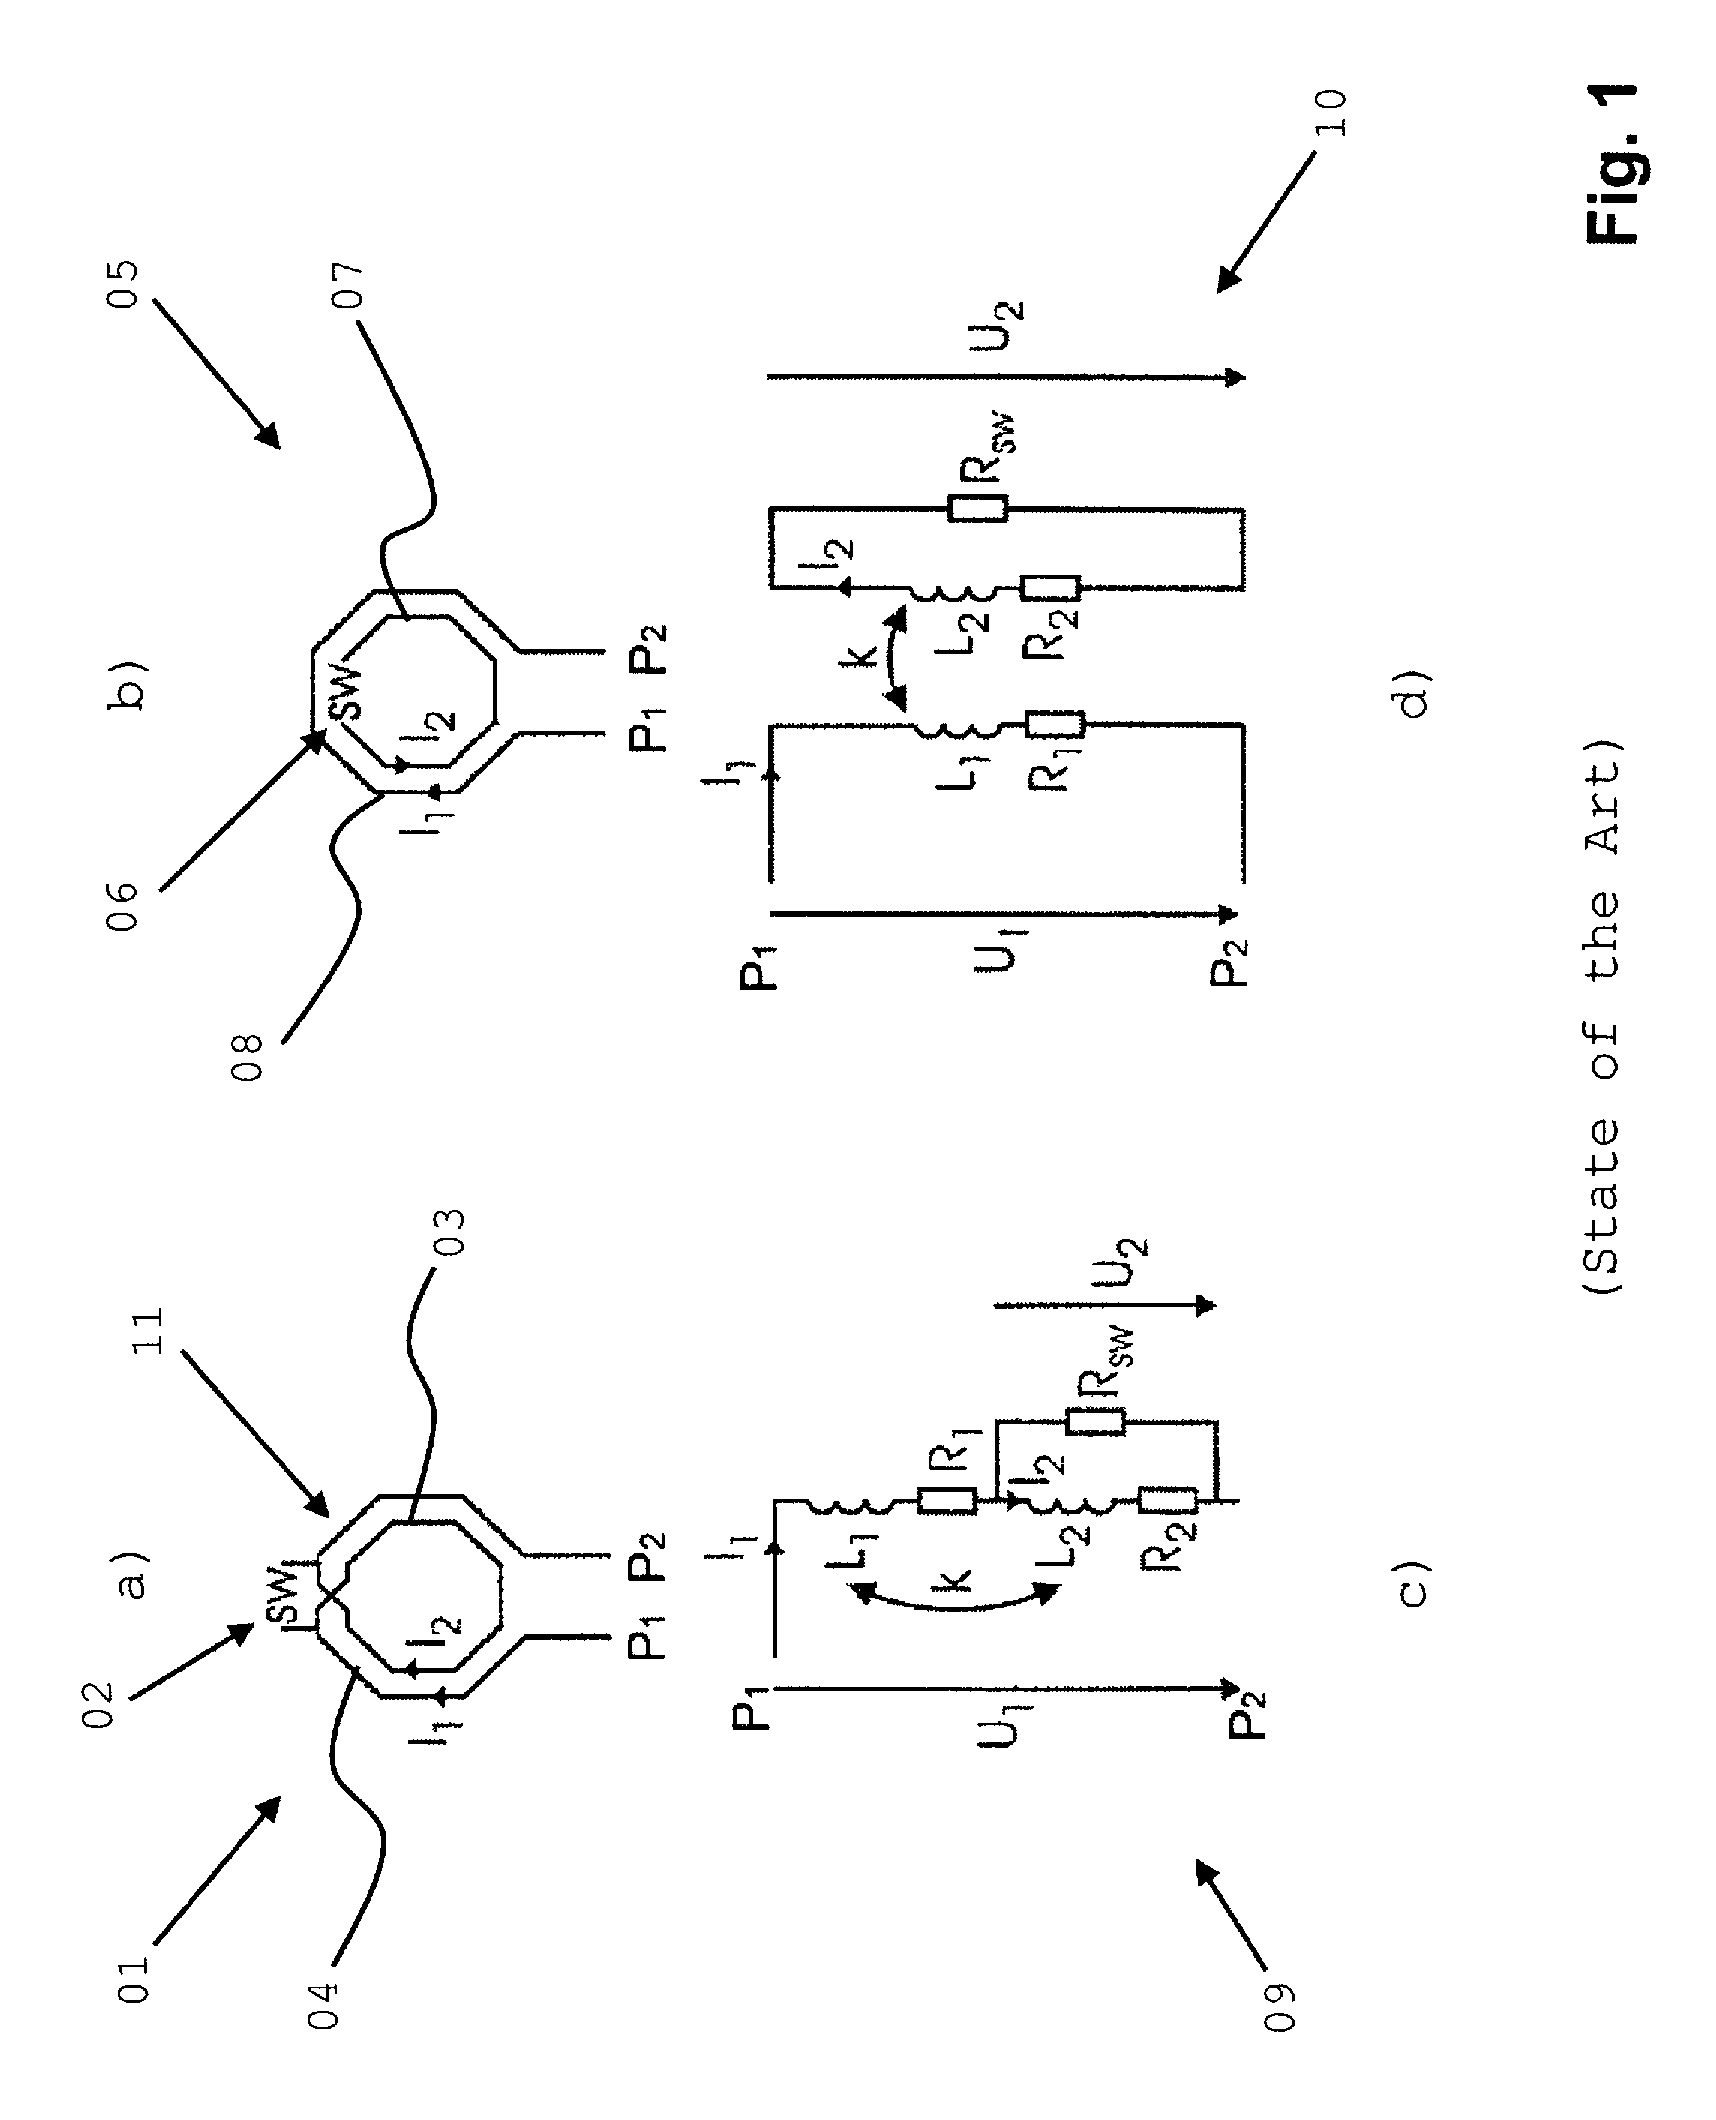 Inductor and method of operating an inductor by combining primary and secondary coils with coupling structures